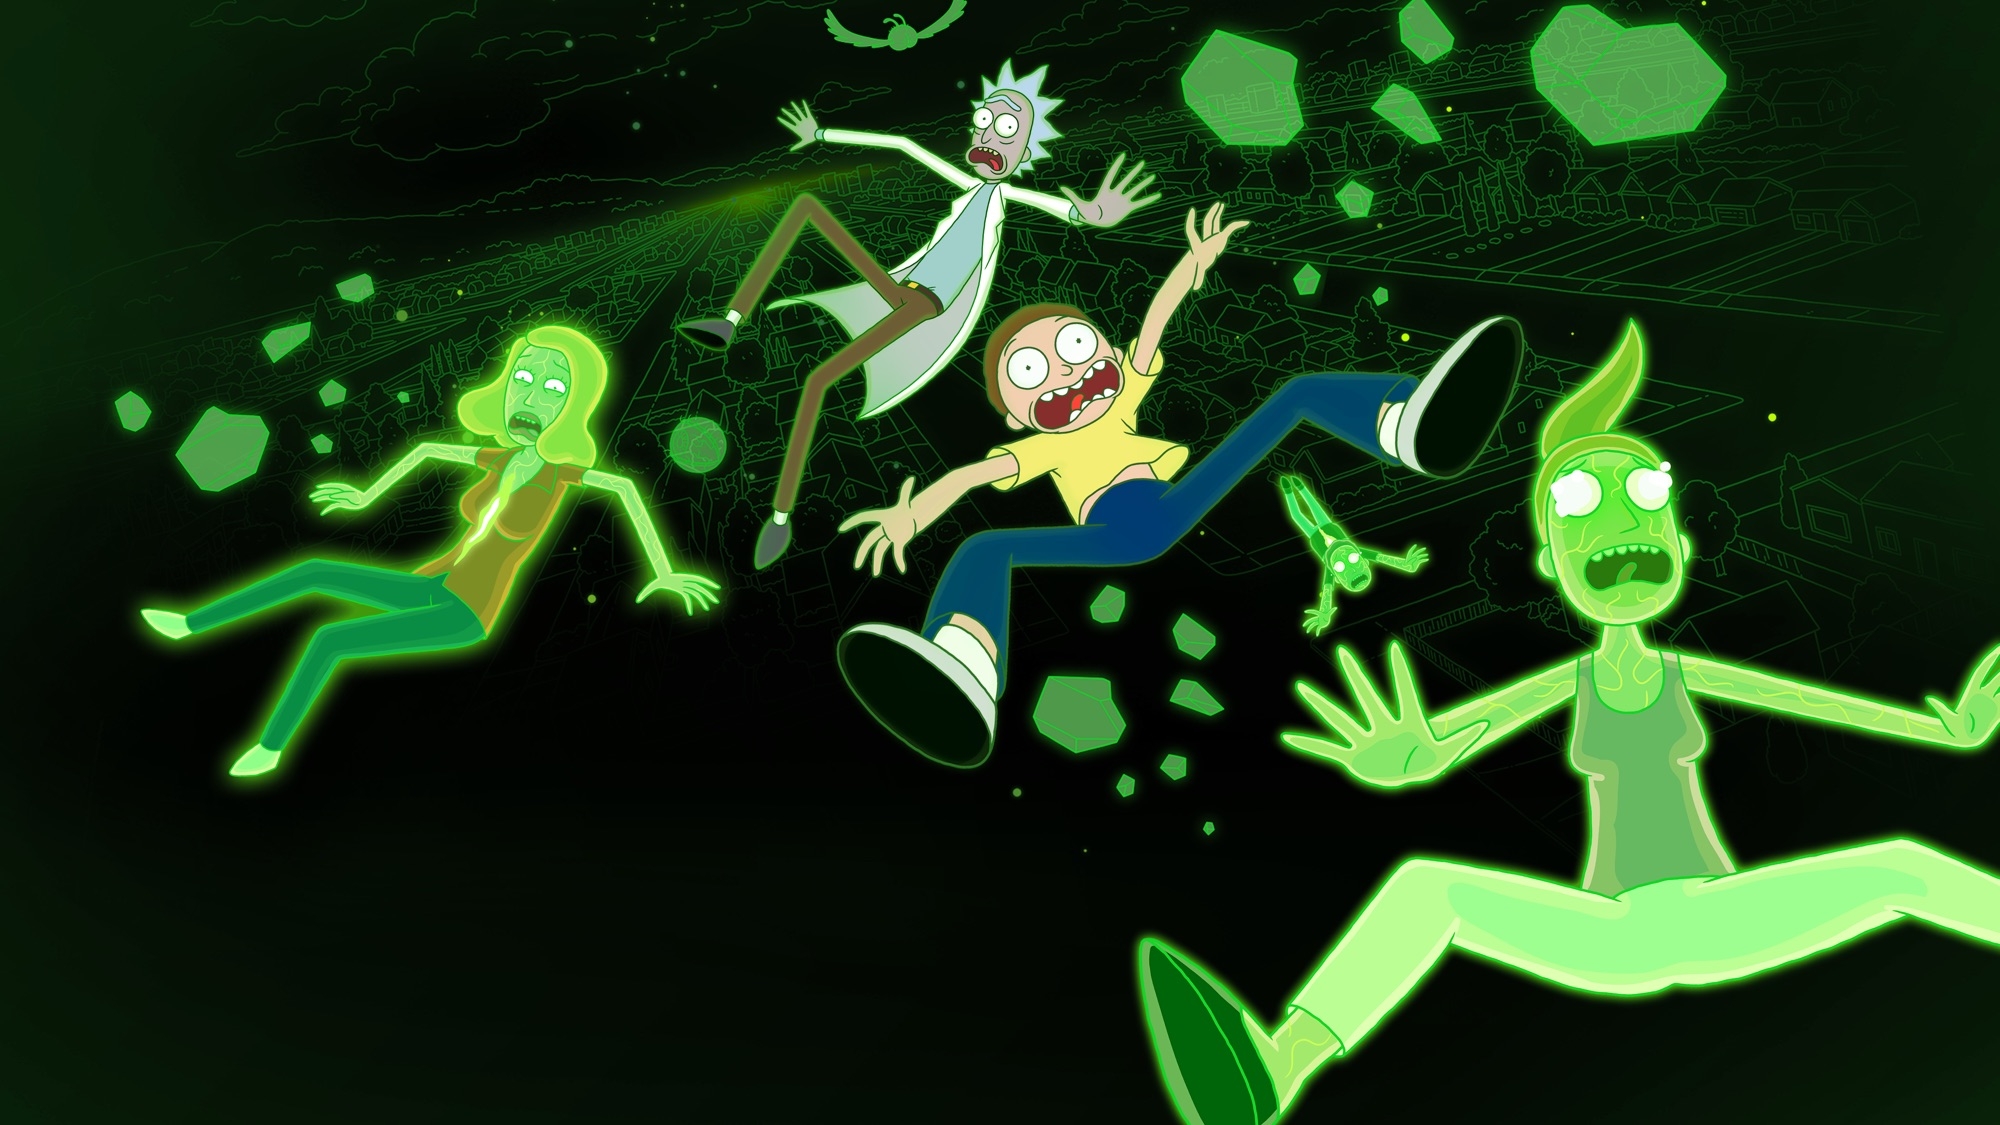 540x960169220 Rick and Morty into The Space HD 540x960169220 Resolution  Wallpaper, HD TV Series 4K Wallpapers, Images, Photos and Background -  Wallpapers Den